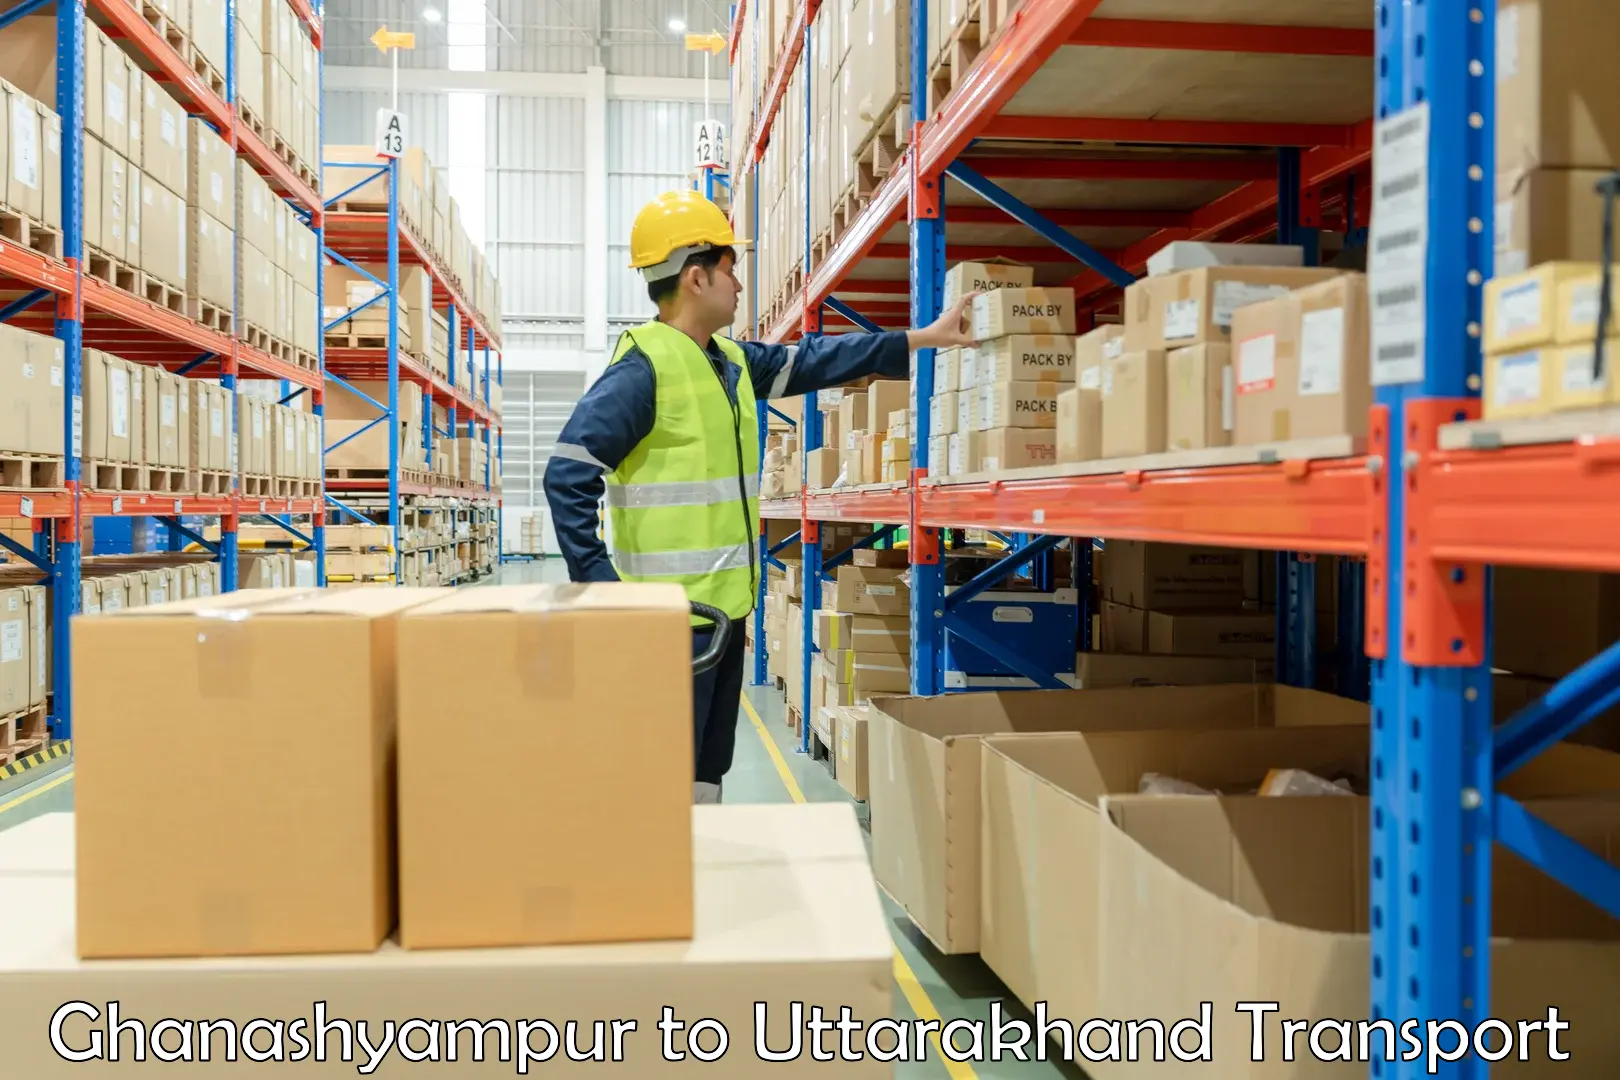 Transport shared services Ghanashyampur to IIT Roorkee